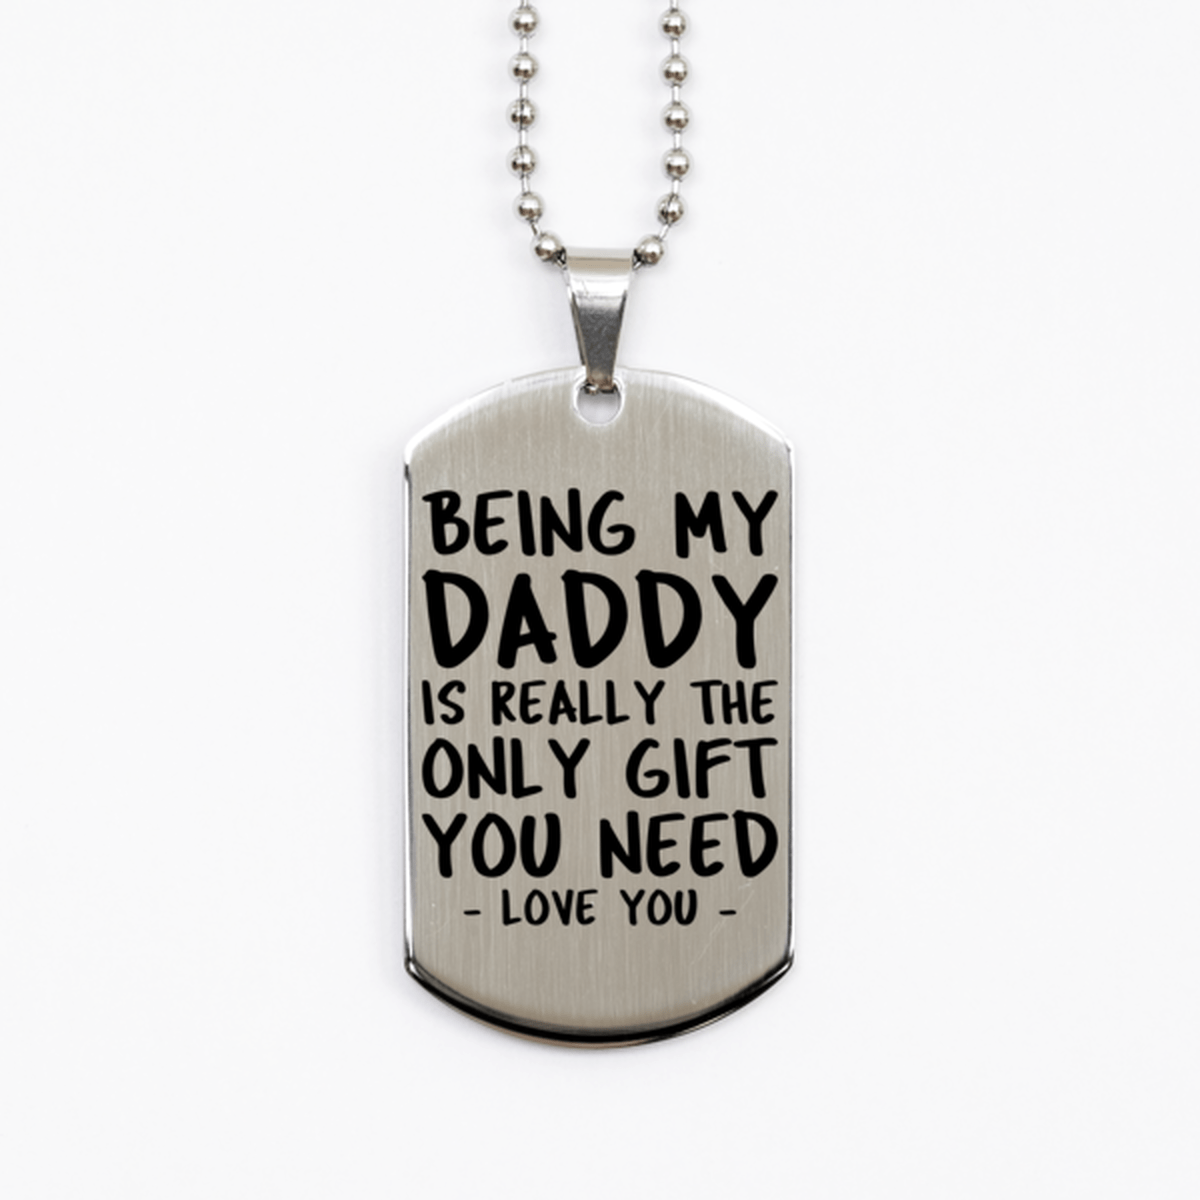 Funny Daddy Silver Dog Tag Necklace, Being My Daddy Is Really the Only Gift You Need, Best Birthday Gifts for Daddy